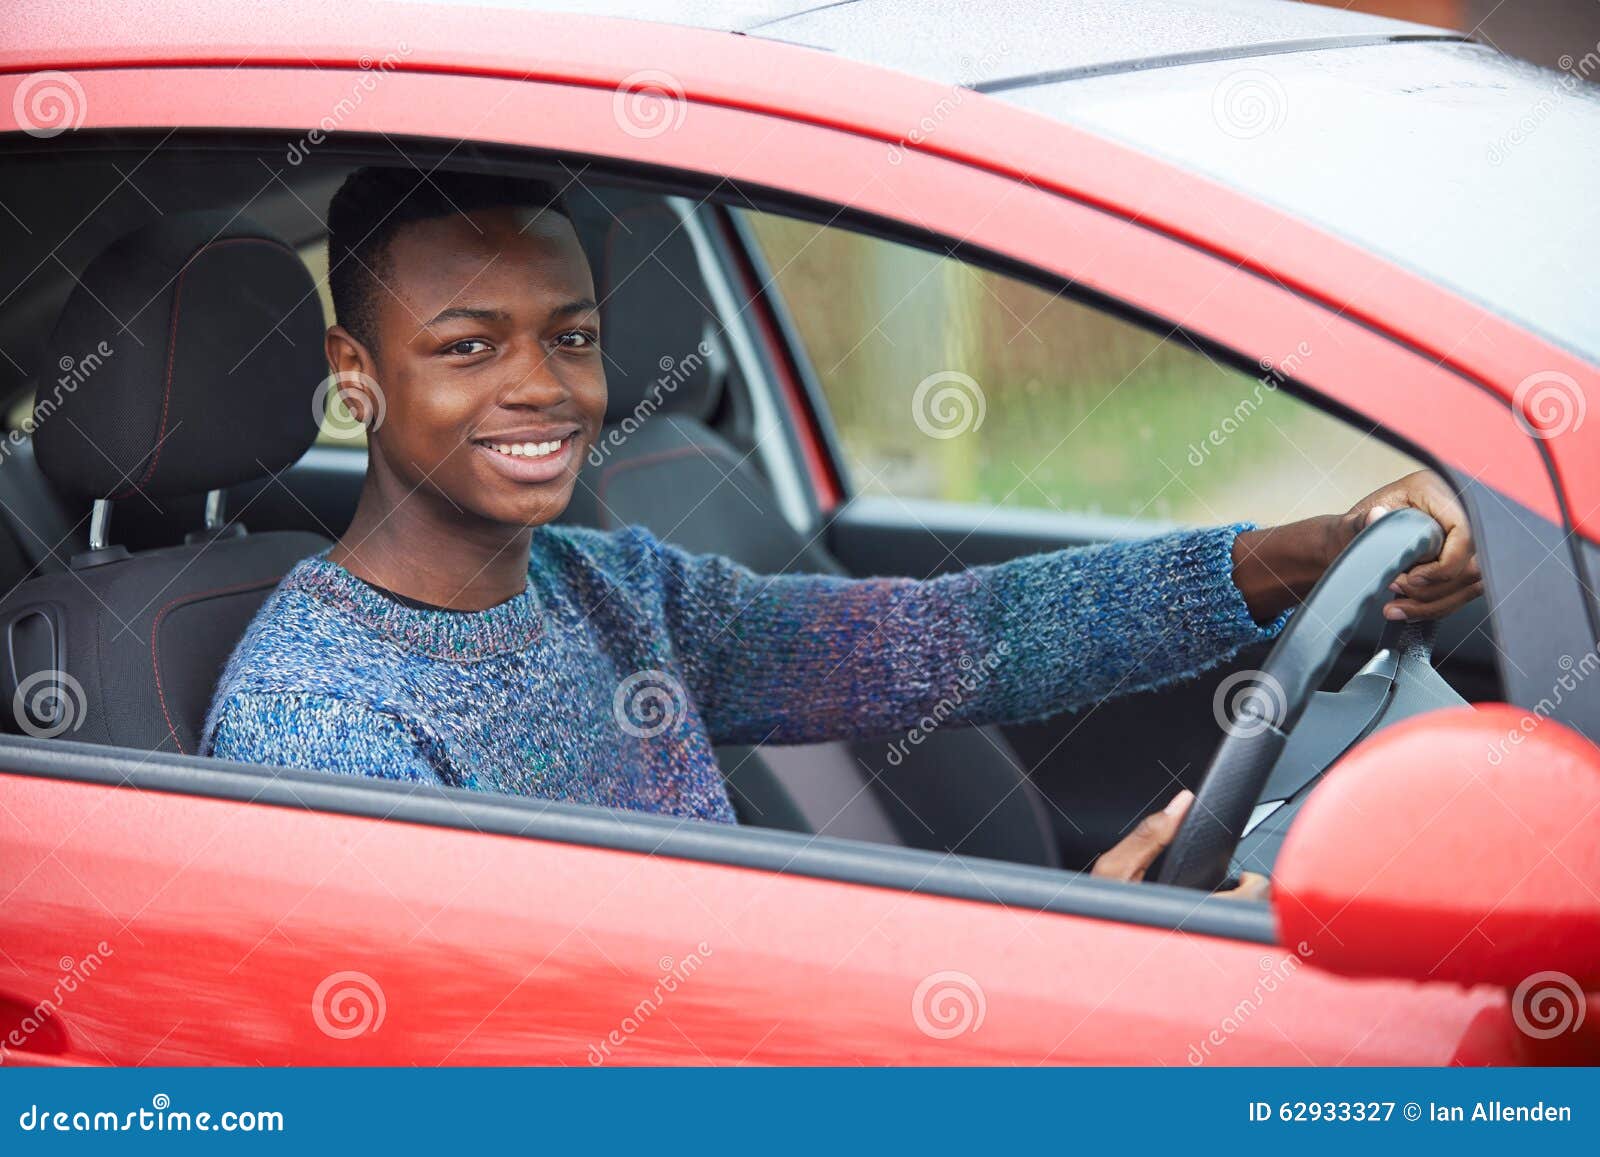 Newly Qualified Teenage Boy Driver Sitting in Car Stock Image - Image ...